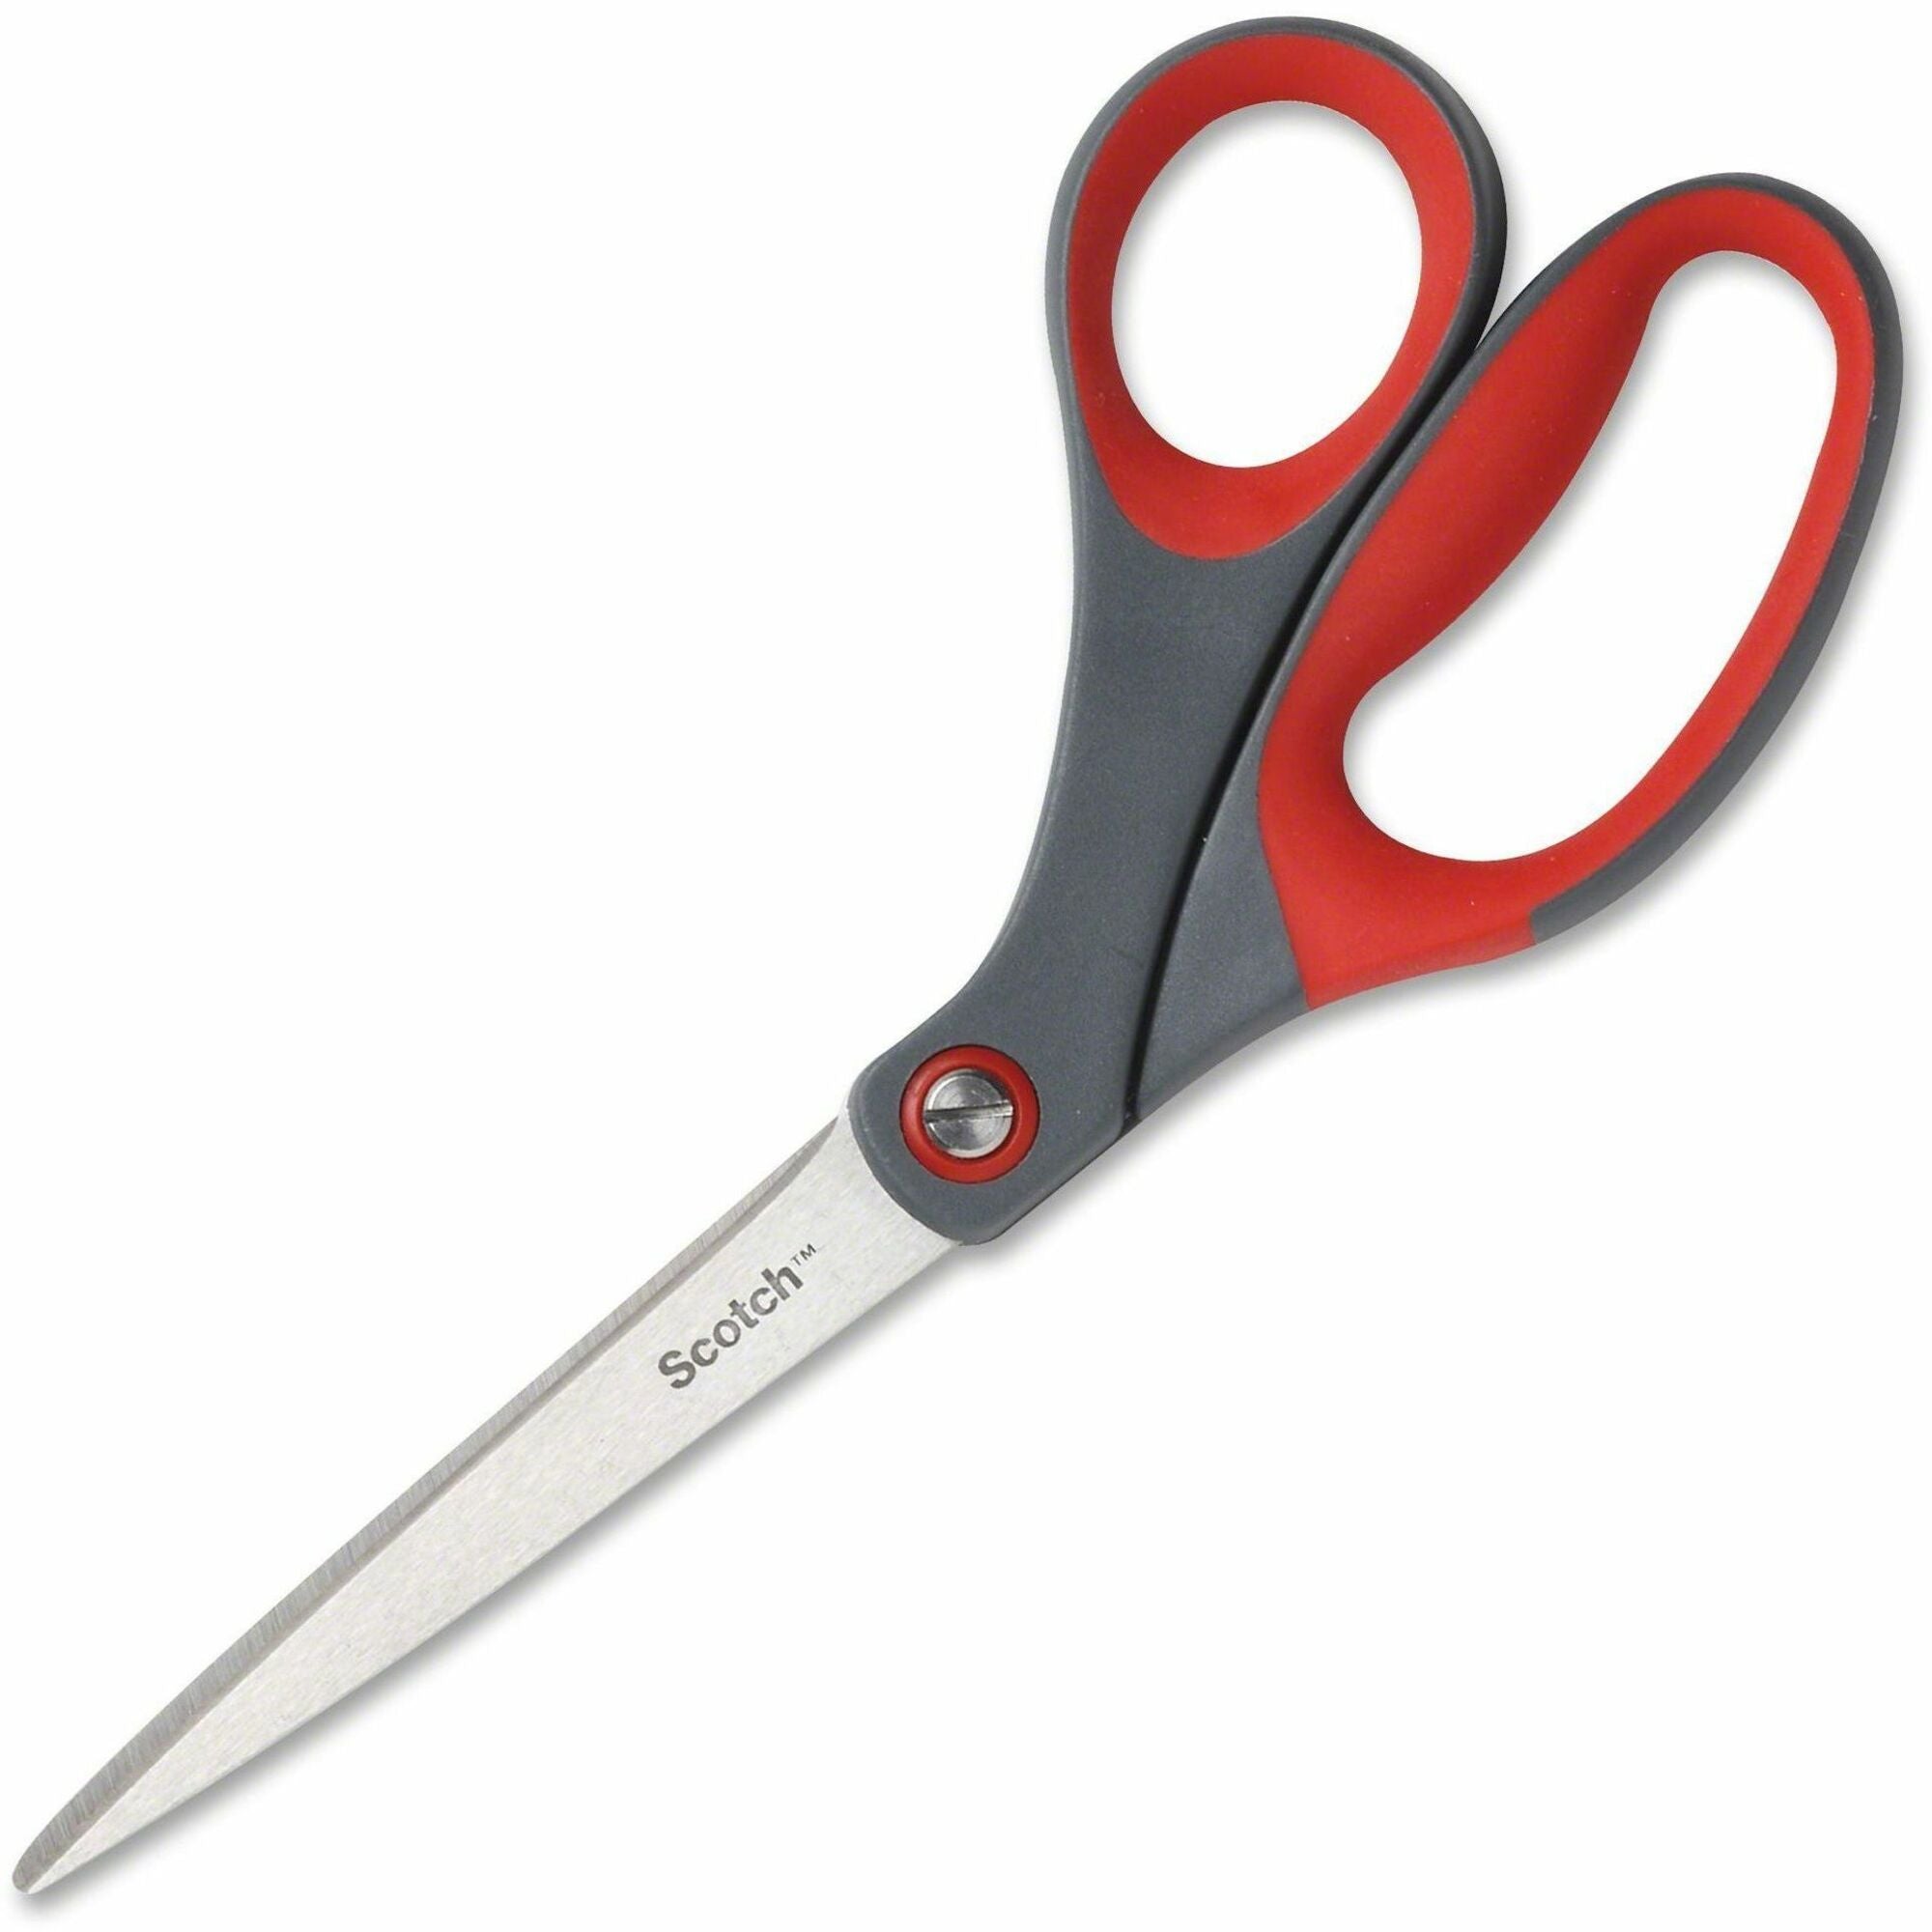 Scotch Precision Scissors - Bent Handles - 8" Overall Length - Left/Right - Stainless Steel - Red, Gray - 1 Each - 